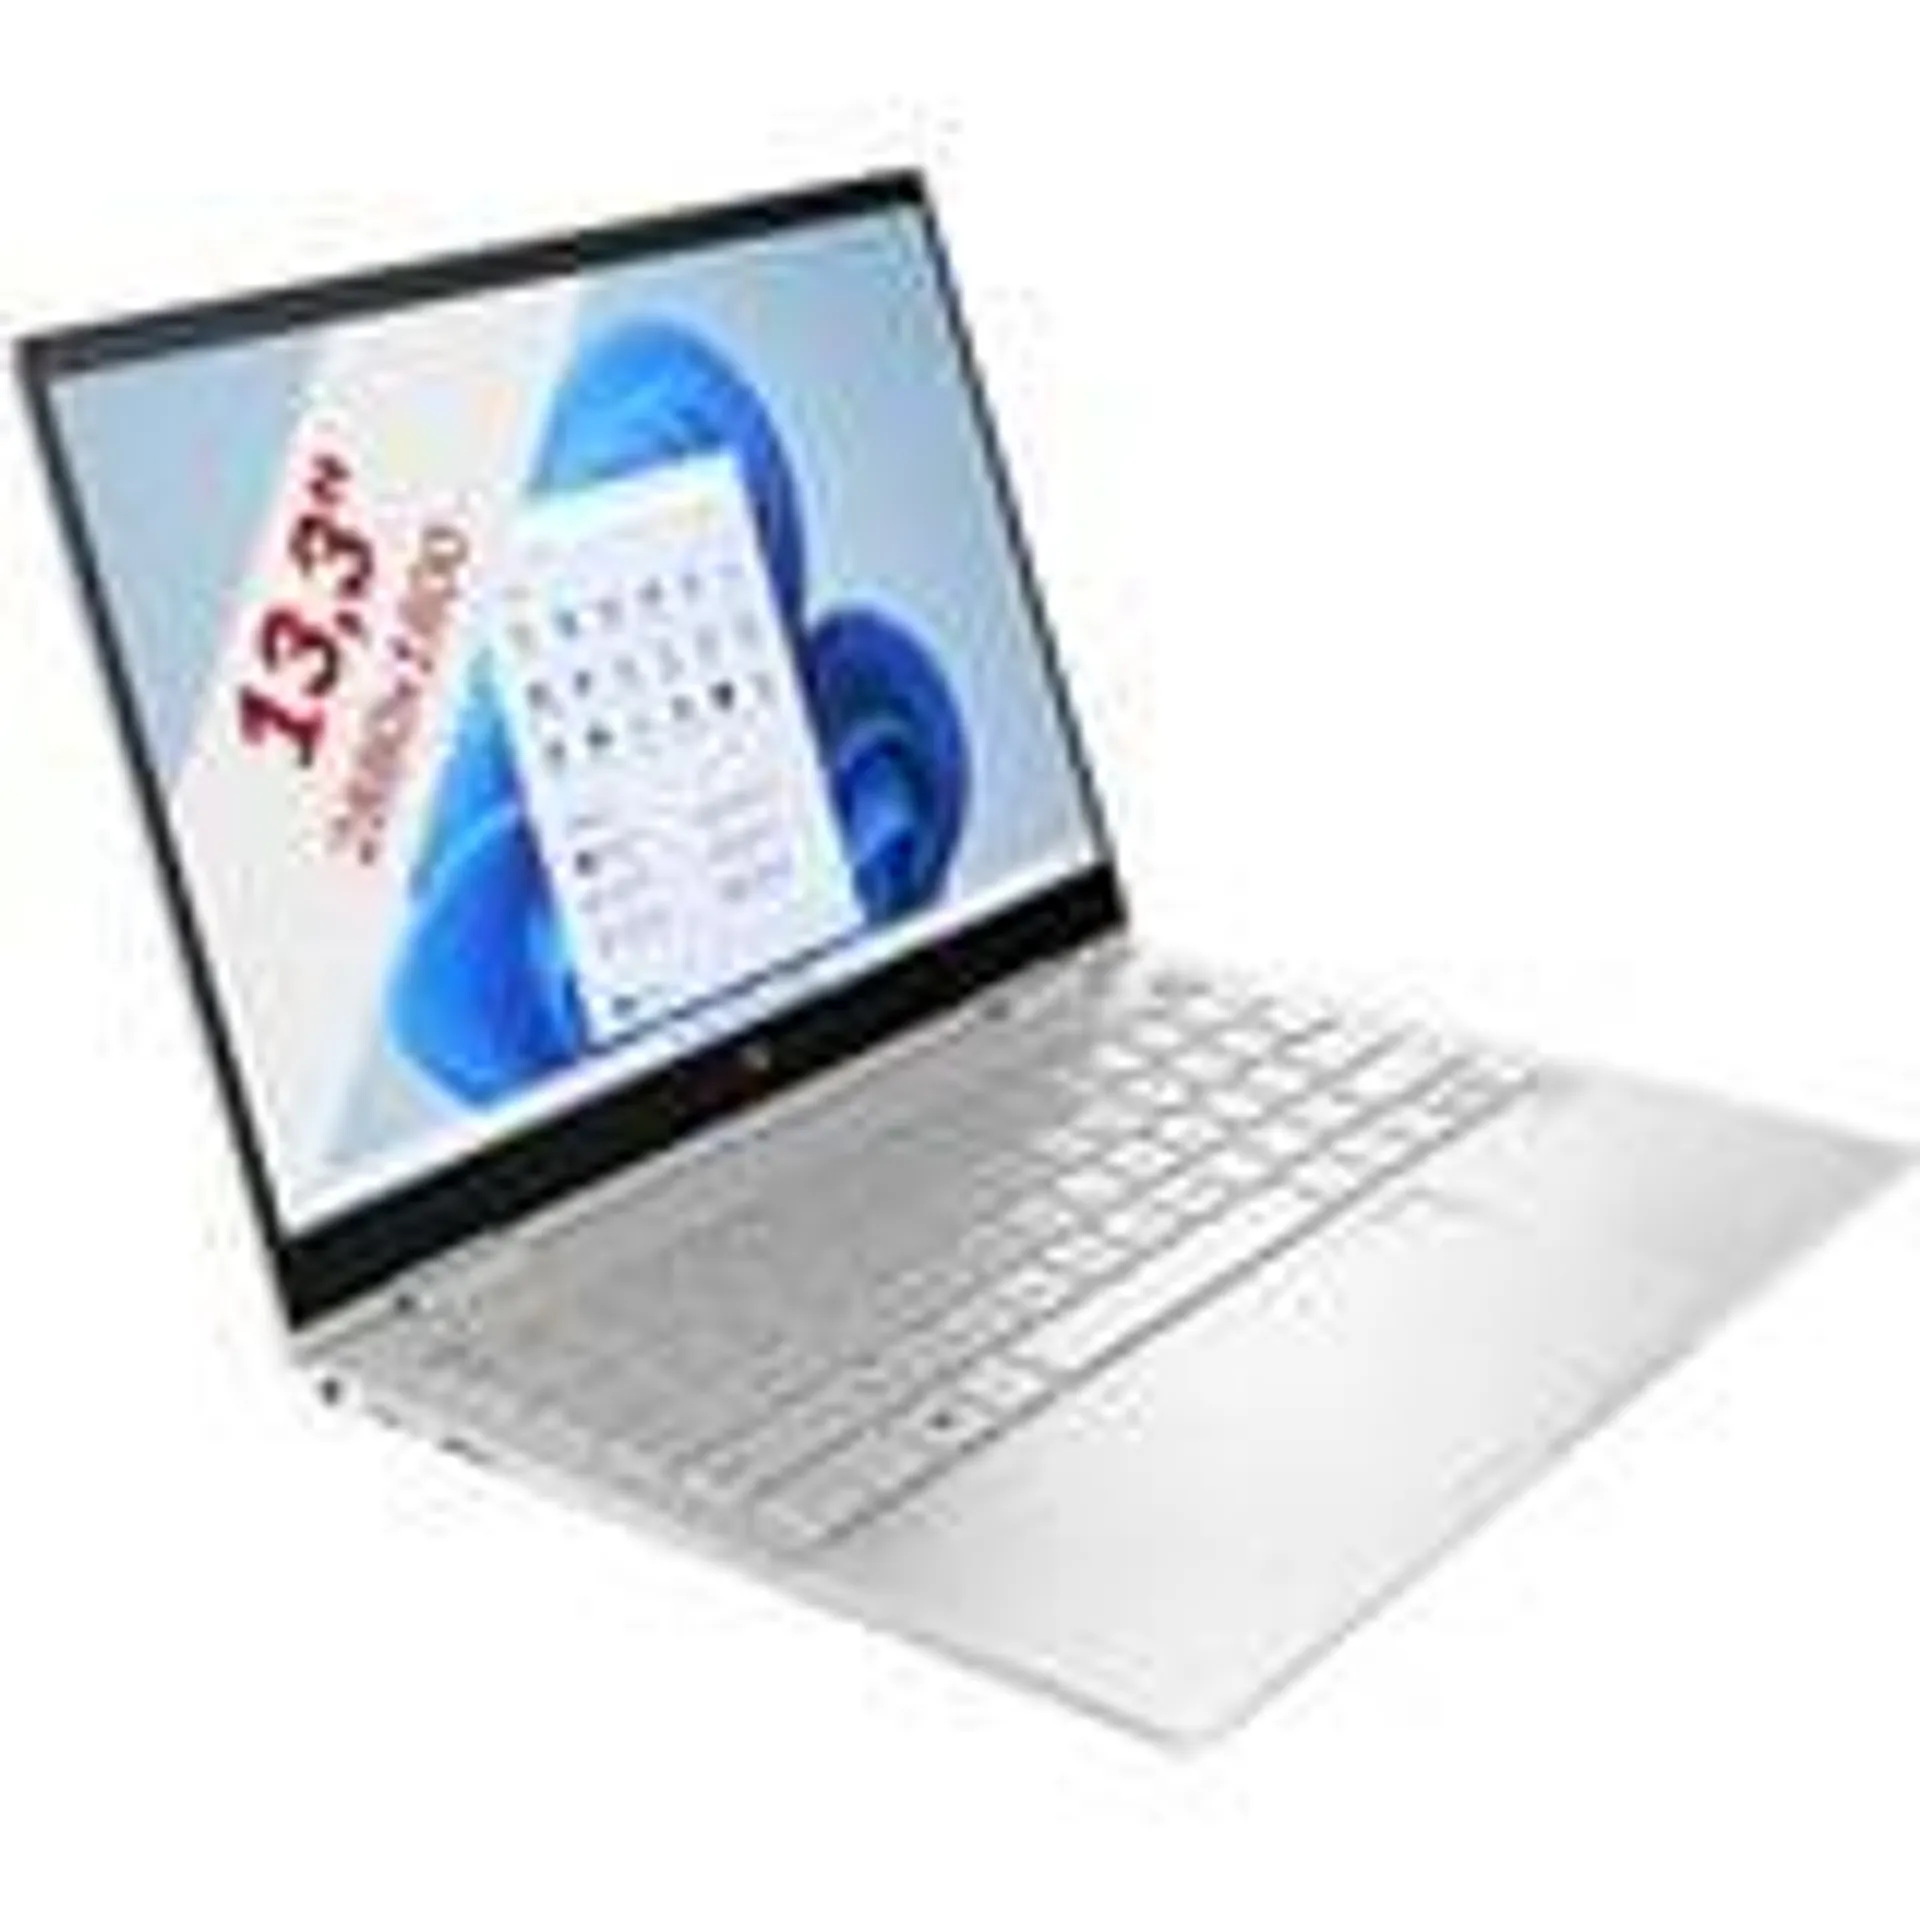 ENVY X360 13-bf0365nd 13.3" 2-in-1 laptop